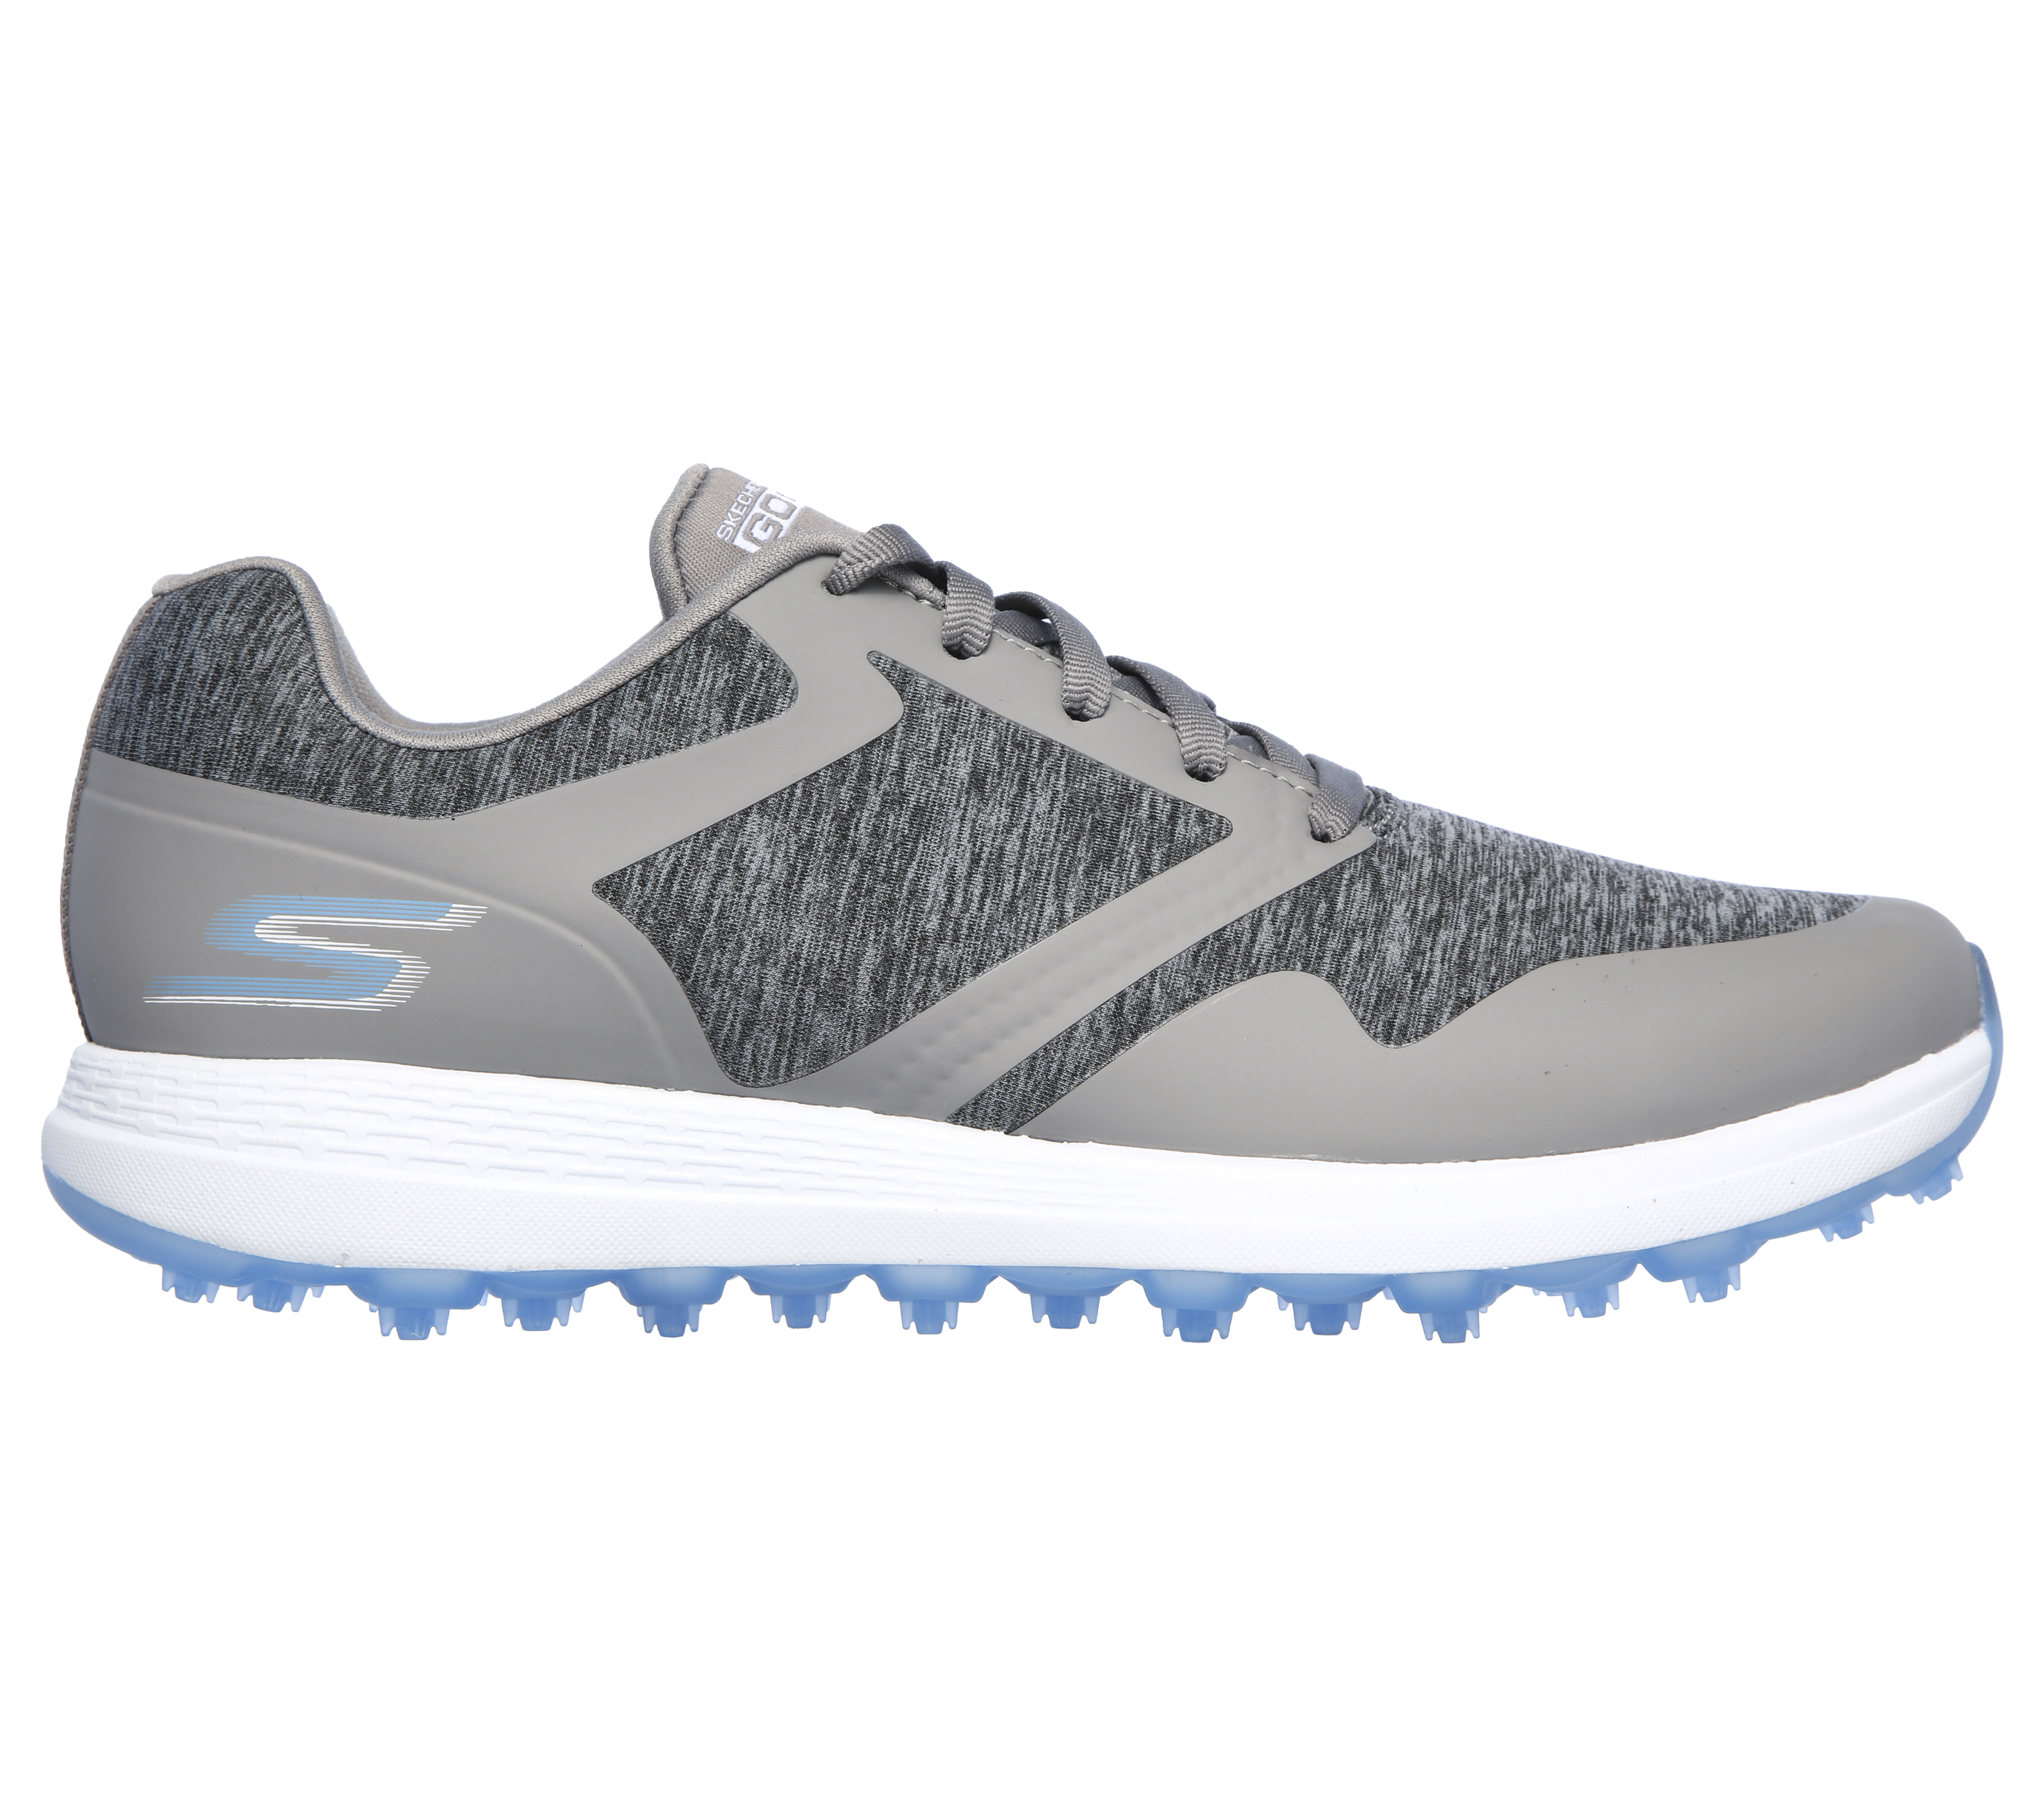 skechers golf shoes wide fitting